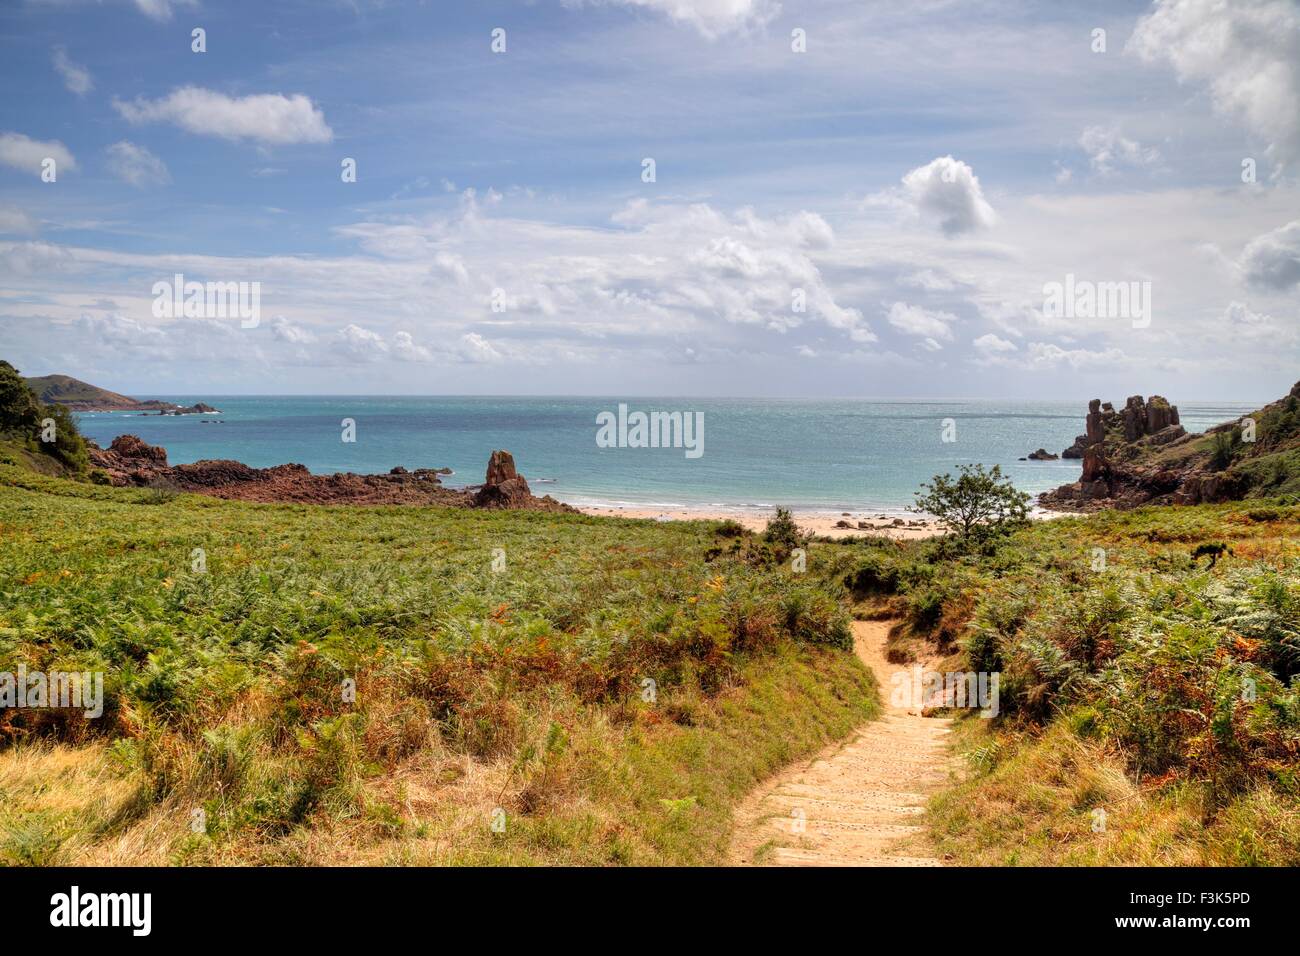 Looking towards the pretty beach at Beauport, Jersey, Channel Islands, British Isles Stock Photo